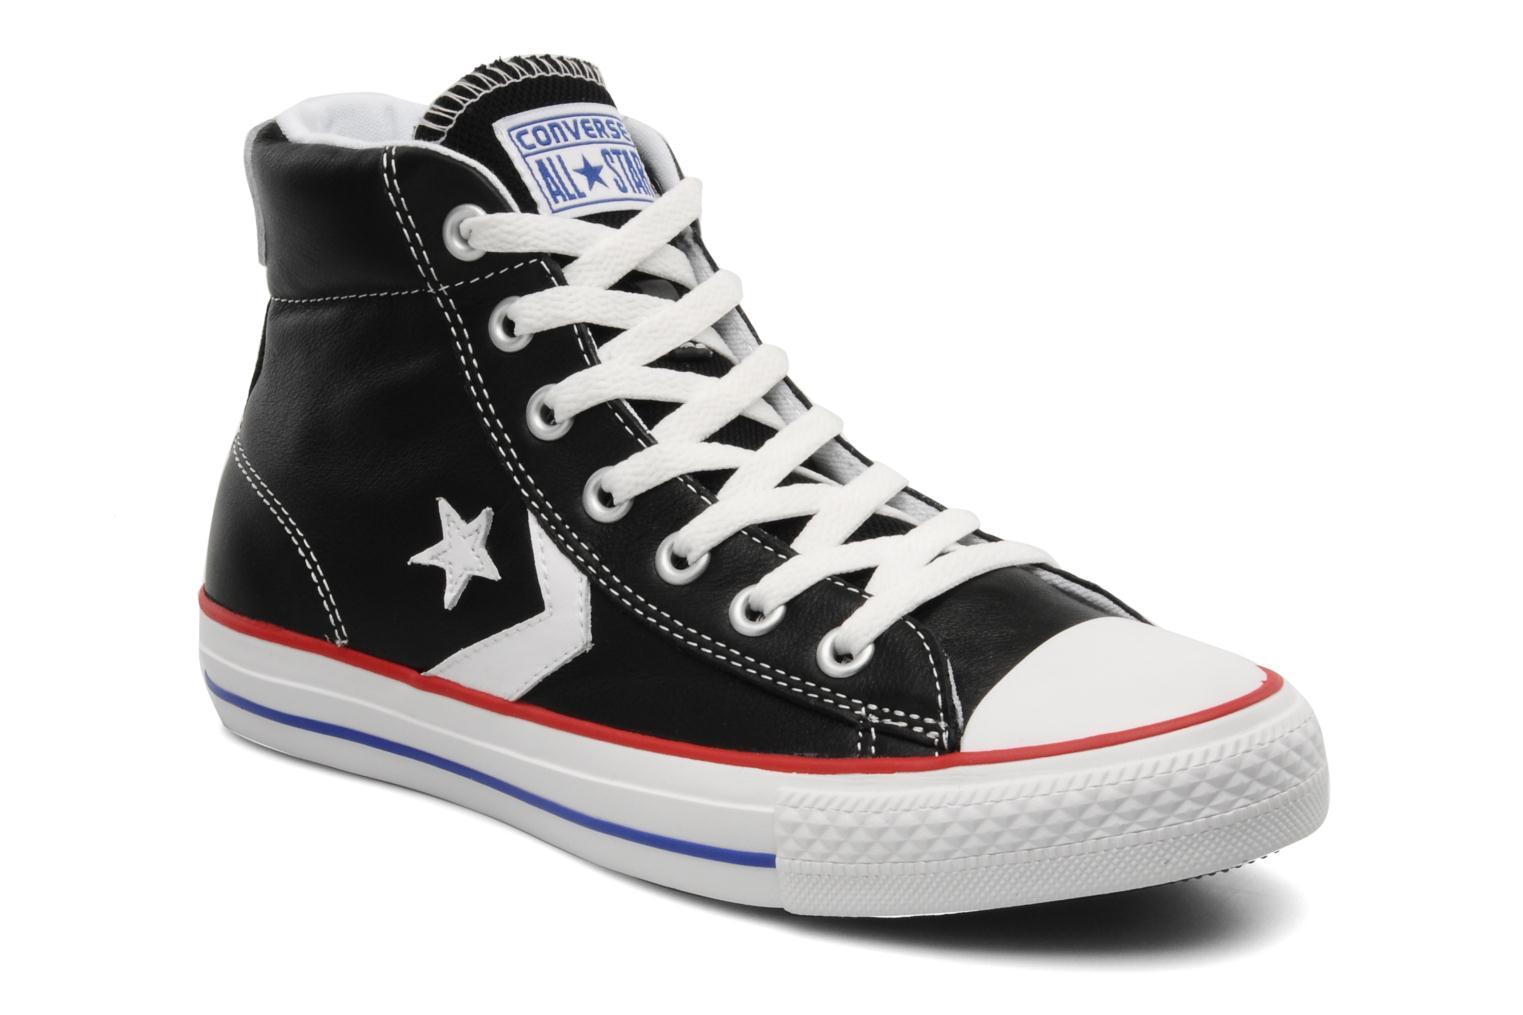 Foto Tenis moda Converse Star Player Leather Mid W Mujer